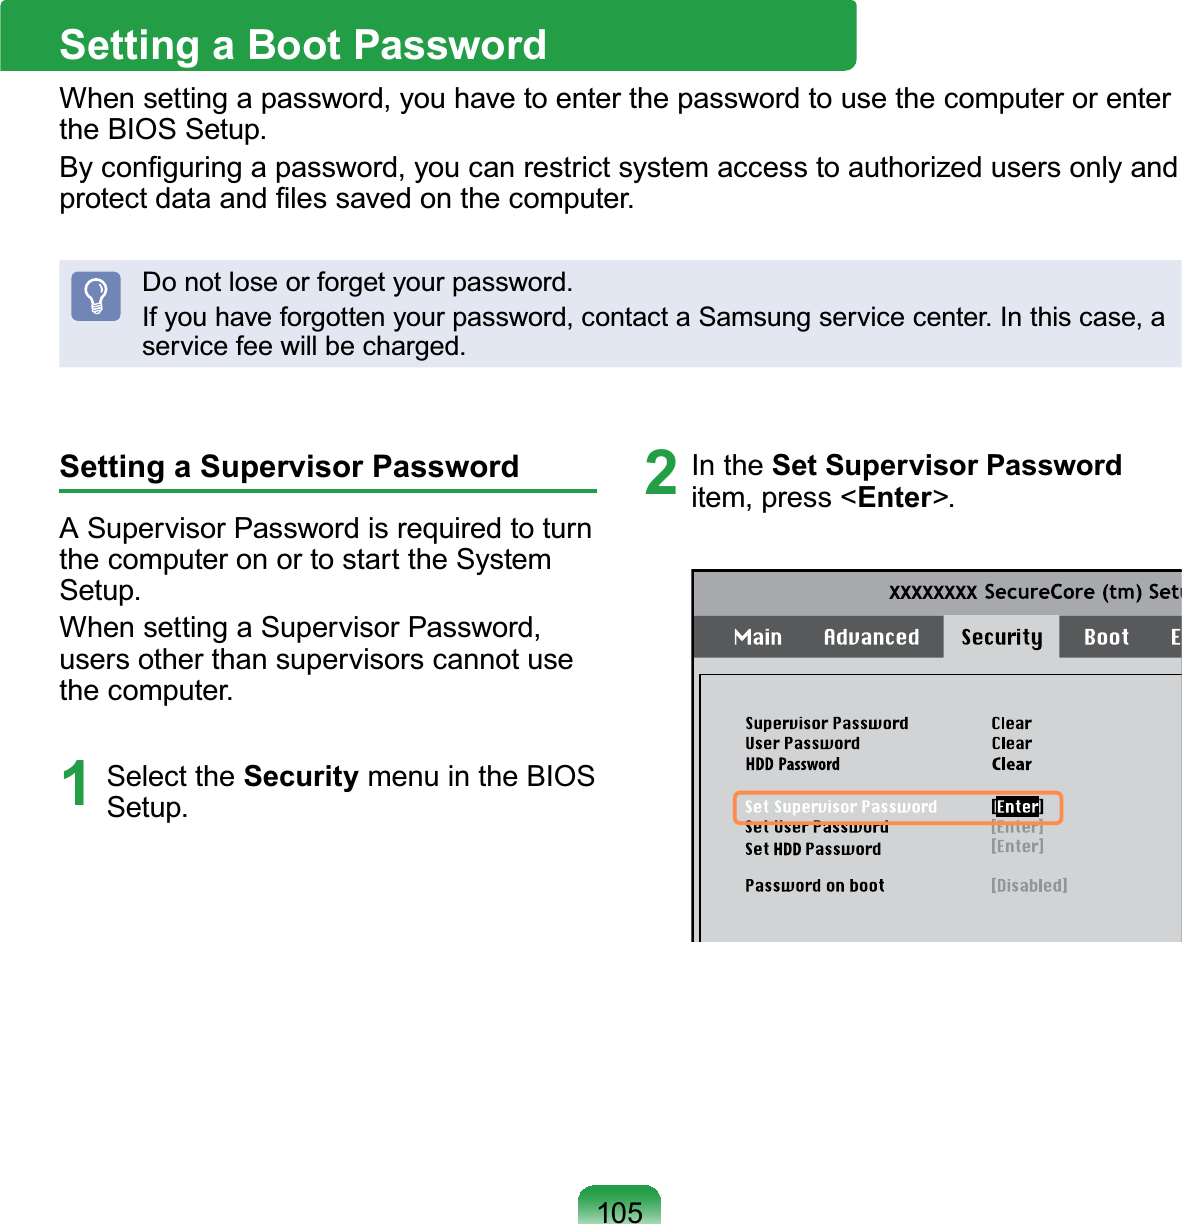 105Setting a Supervisor PasswordASupervisorPasswordisrequiredtoturnthecomputeronortostarttheSystemSetup.WhensettingaSupervisorPassword,users other than supervisors cannot usethe computer.1 Select the Security menu in the BIOSSetup.2 In the Set Supervisor Passworditem, press &lt;Enter&gt;.XXXXXXXXSetting a Boot PasswordWhensettingapassword,youhavetoenterthepasswordtousethecomputerorentertheBIOSSetup.%\FRQ¿JXULQJDSDVVZRUG\RXFDQUHVWULFWV\VWHPDFFHVVWRDXWKRUL]HGXVHUVRQO\DQGSURWHFWGDWDDQG¿OHVVDYHGRQWKHFRPSXWHUDonotloseorforgetyourpassword.Ifyouhaveforgottenyourpassword,contactaSamsungservicecenter.Inthiscase,aservice fee will be charged.